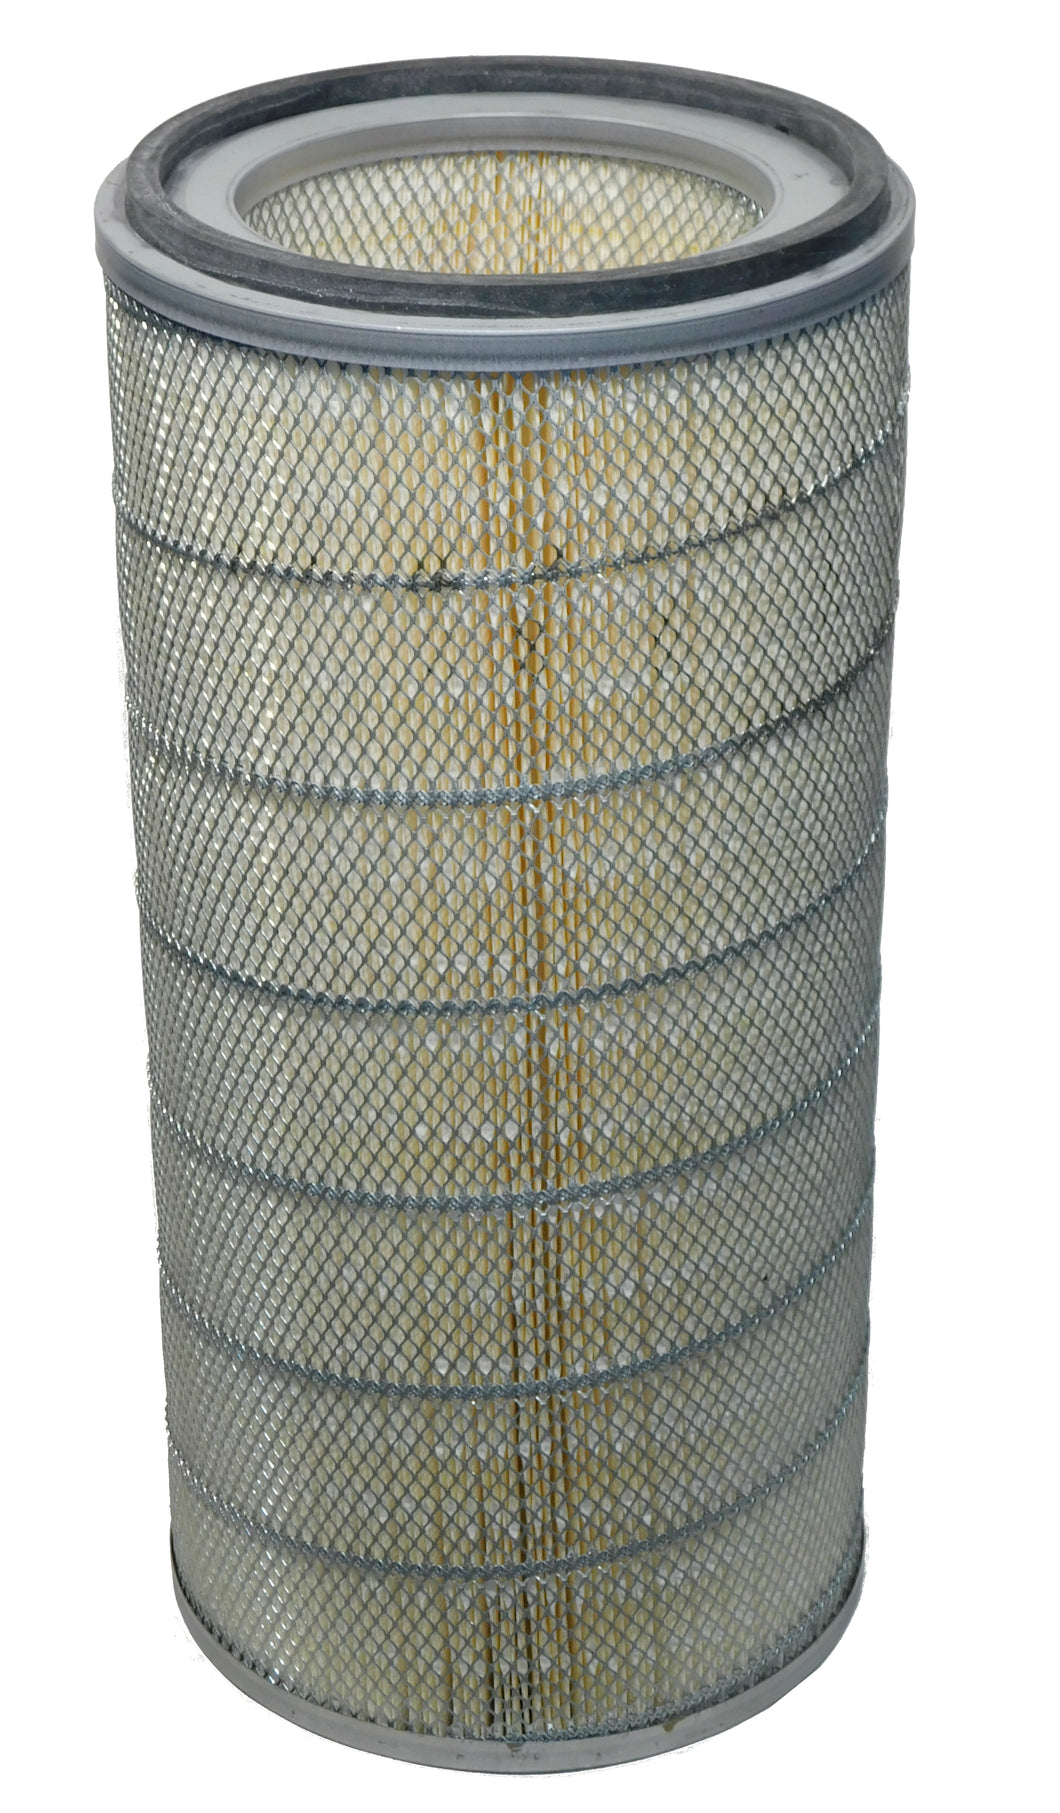 60-01-001 - Envirosystems - OEM Replacement Filter